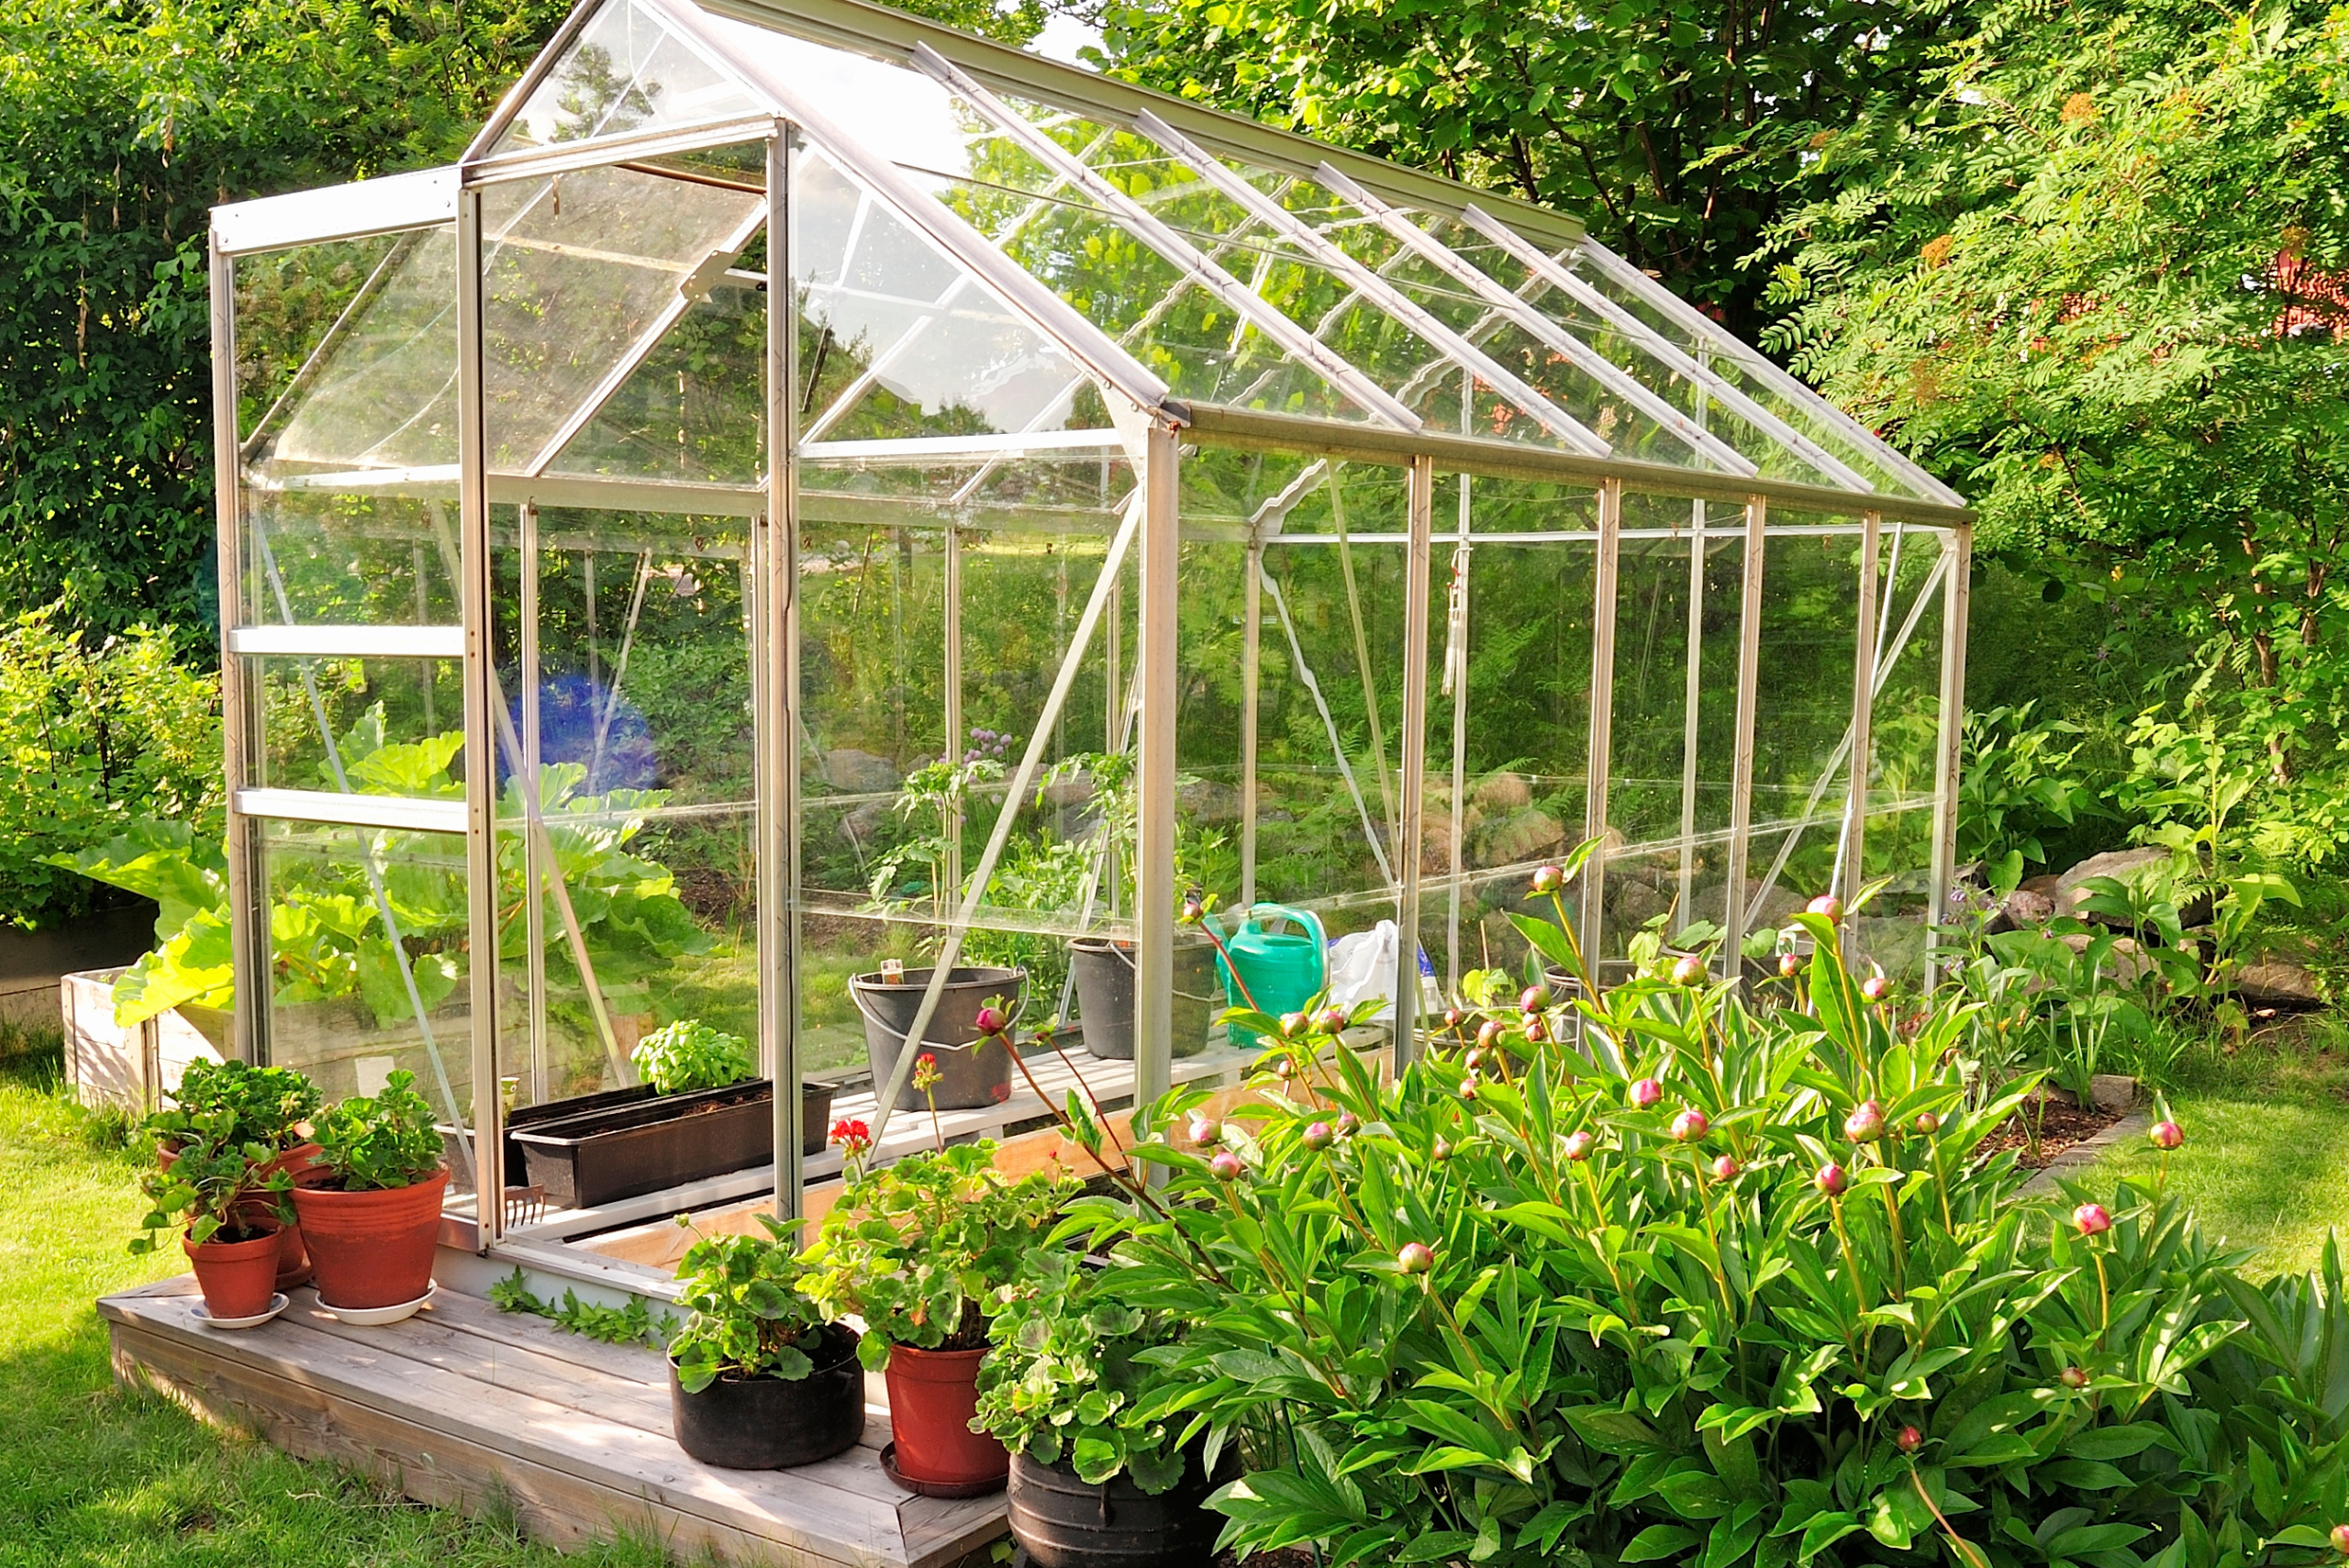 Greenhouse with glass covering that is see through.